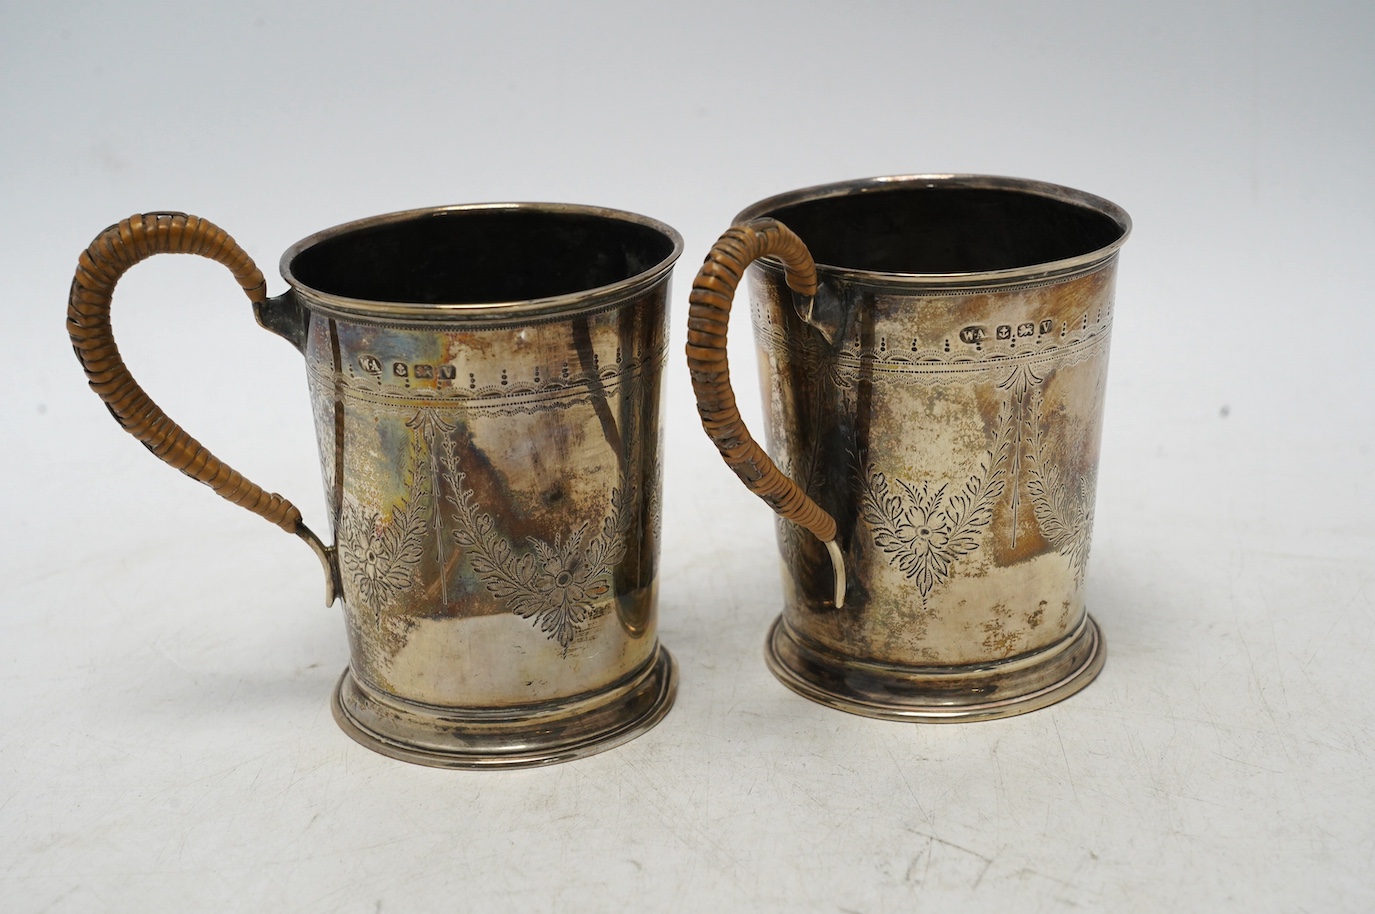 A pair of George V engraved silver mugs, with rattan handles, William Aitken, Birmingham, 1920, height 95mm, gross weight 5.9oz. Condition - fair